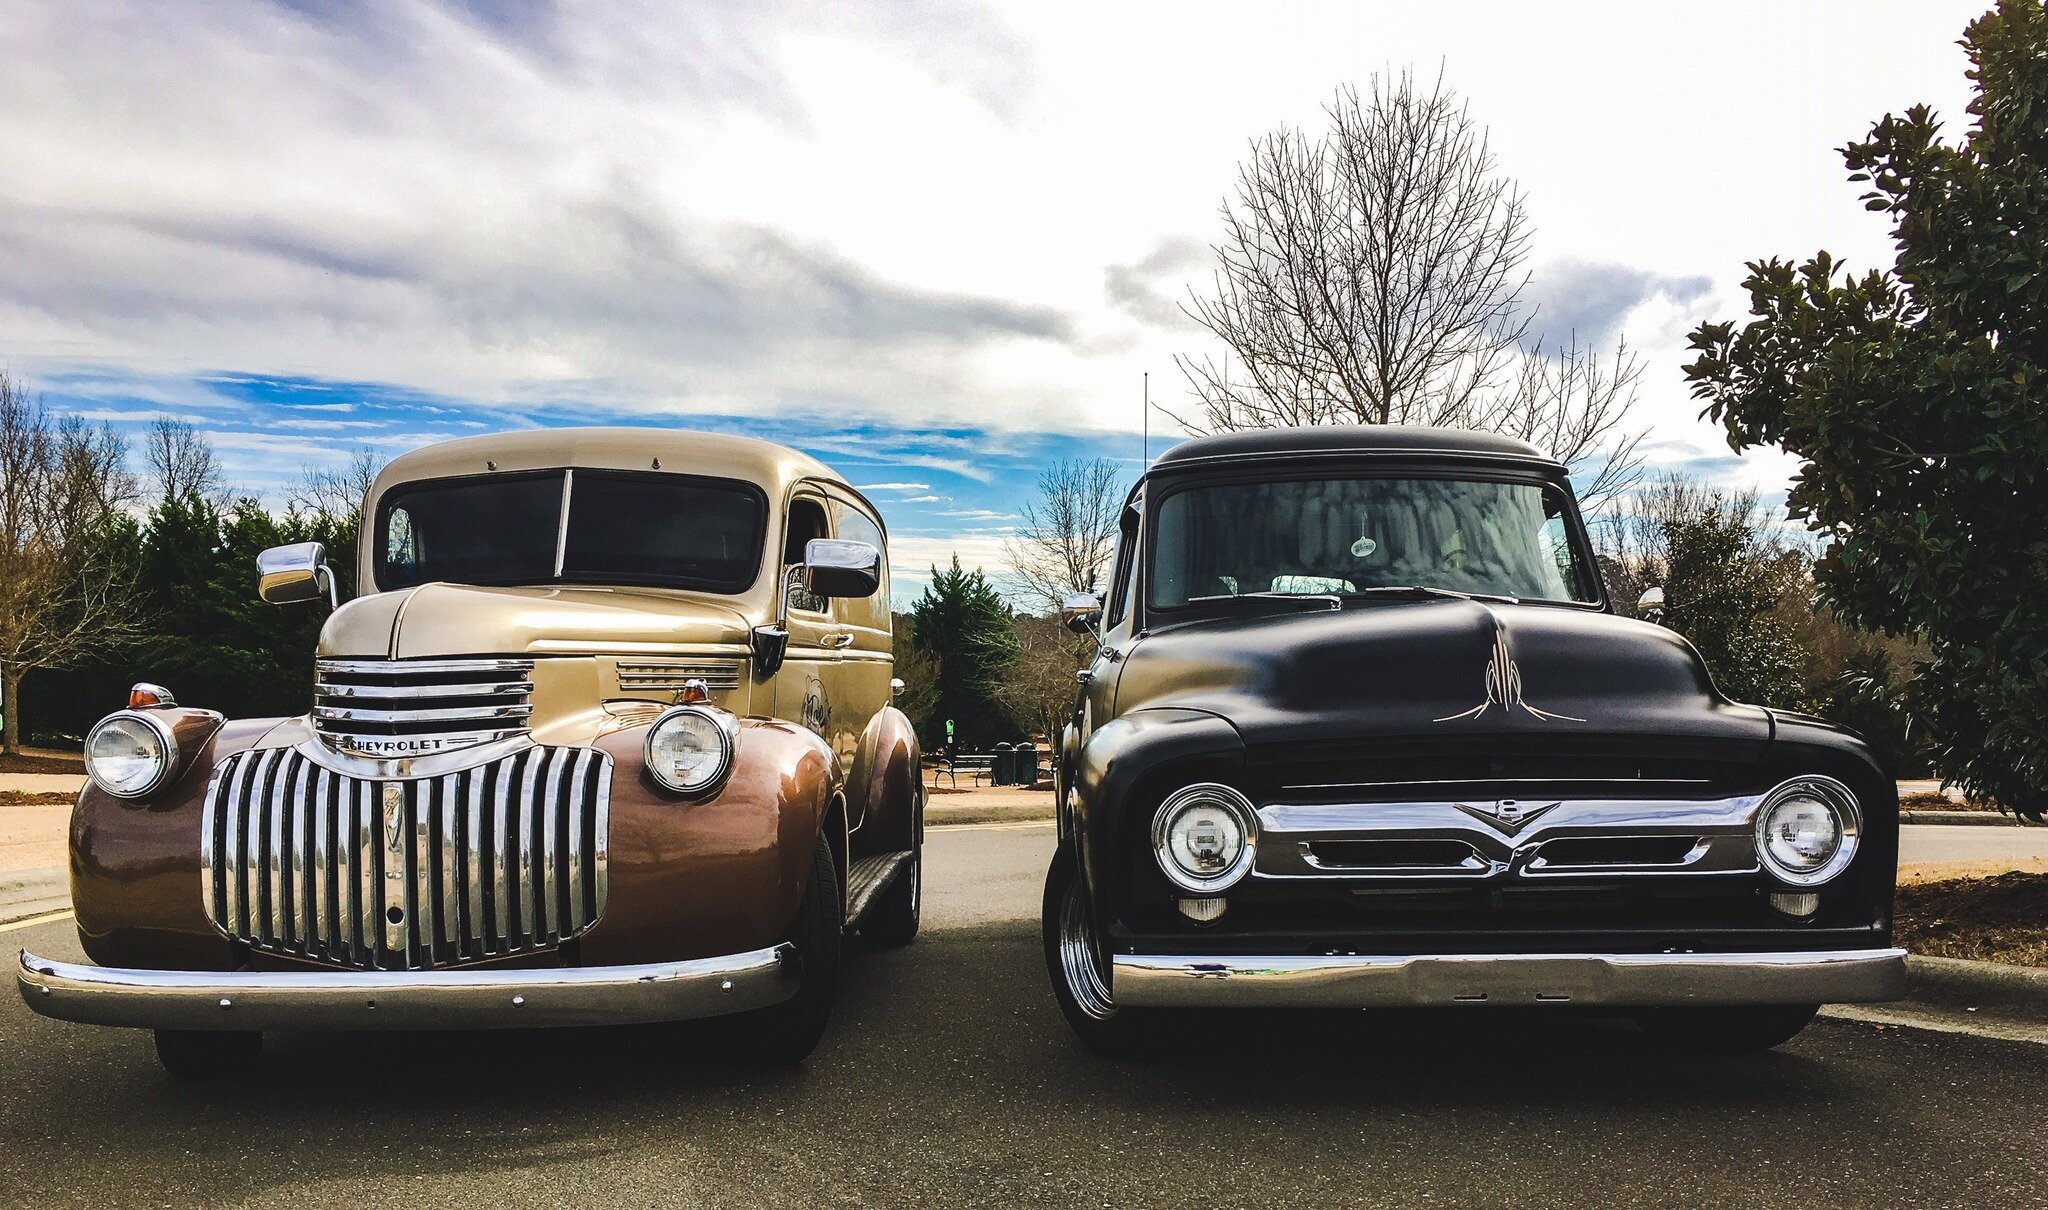 Attention future brides and grooms... Come check out Ramona, our '46 Chevy and Mo, our '54 Ford, this Saturday, January 7. Both will be serving samples at the Forever Bridal Wedding Show from 10am-5pm. If you have not gotten your tickets, then visit 